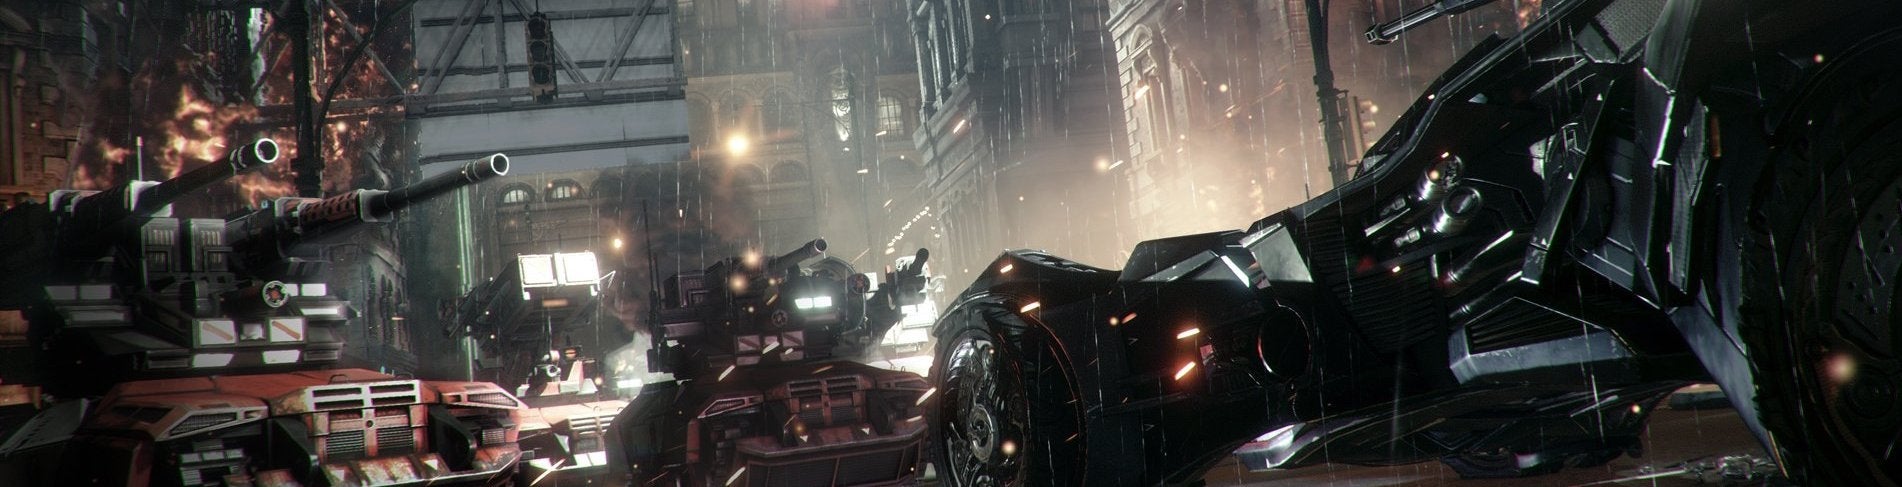 Image for Video: Hands-on with Arkham Knight, Splatoon hype and cats - The Eurogamer Show